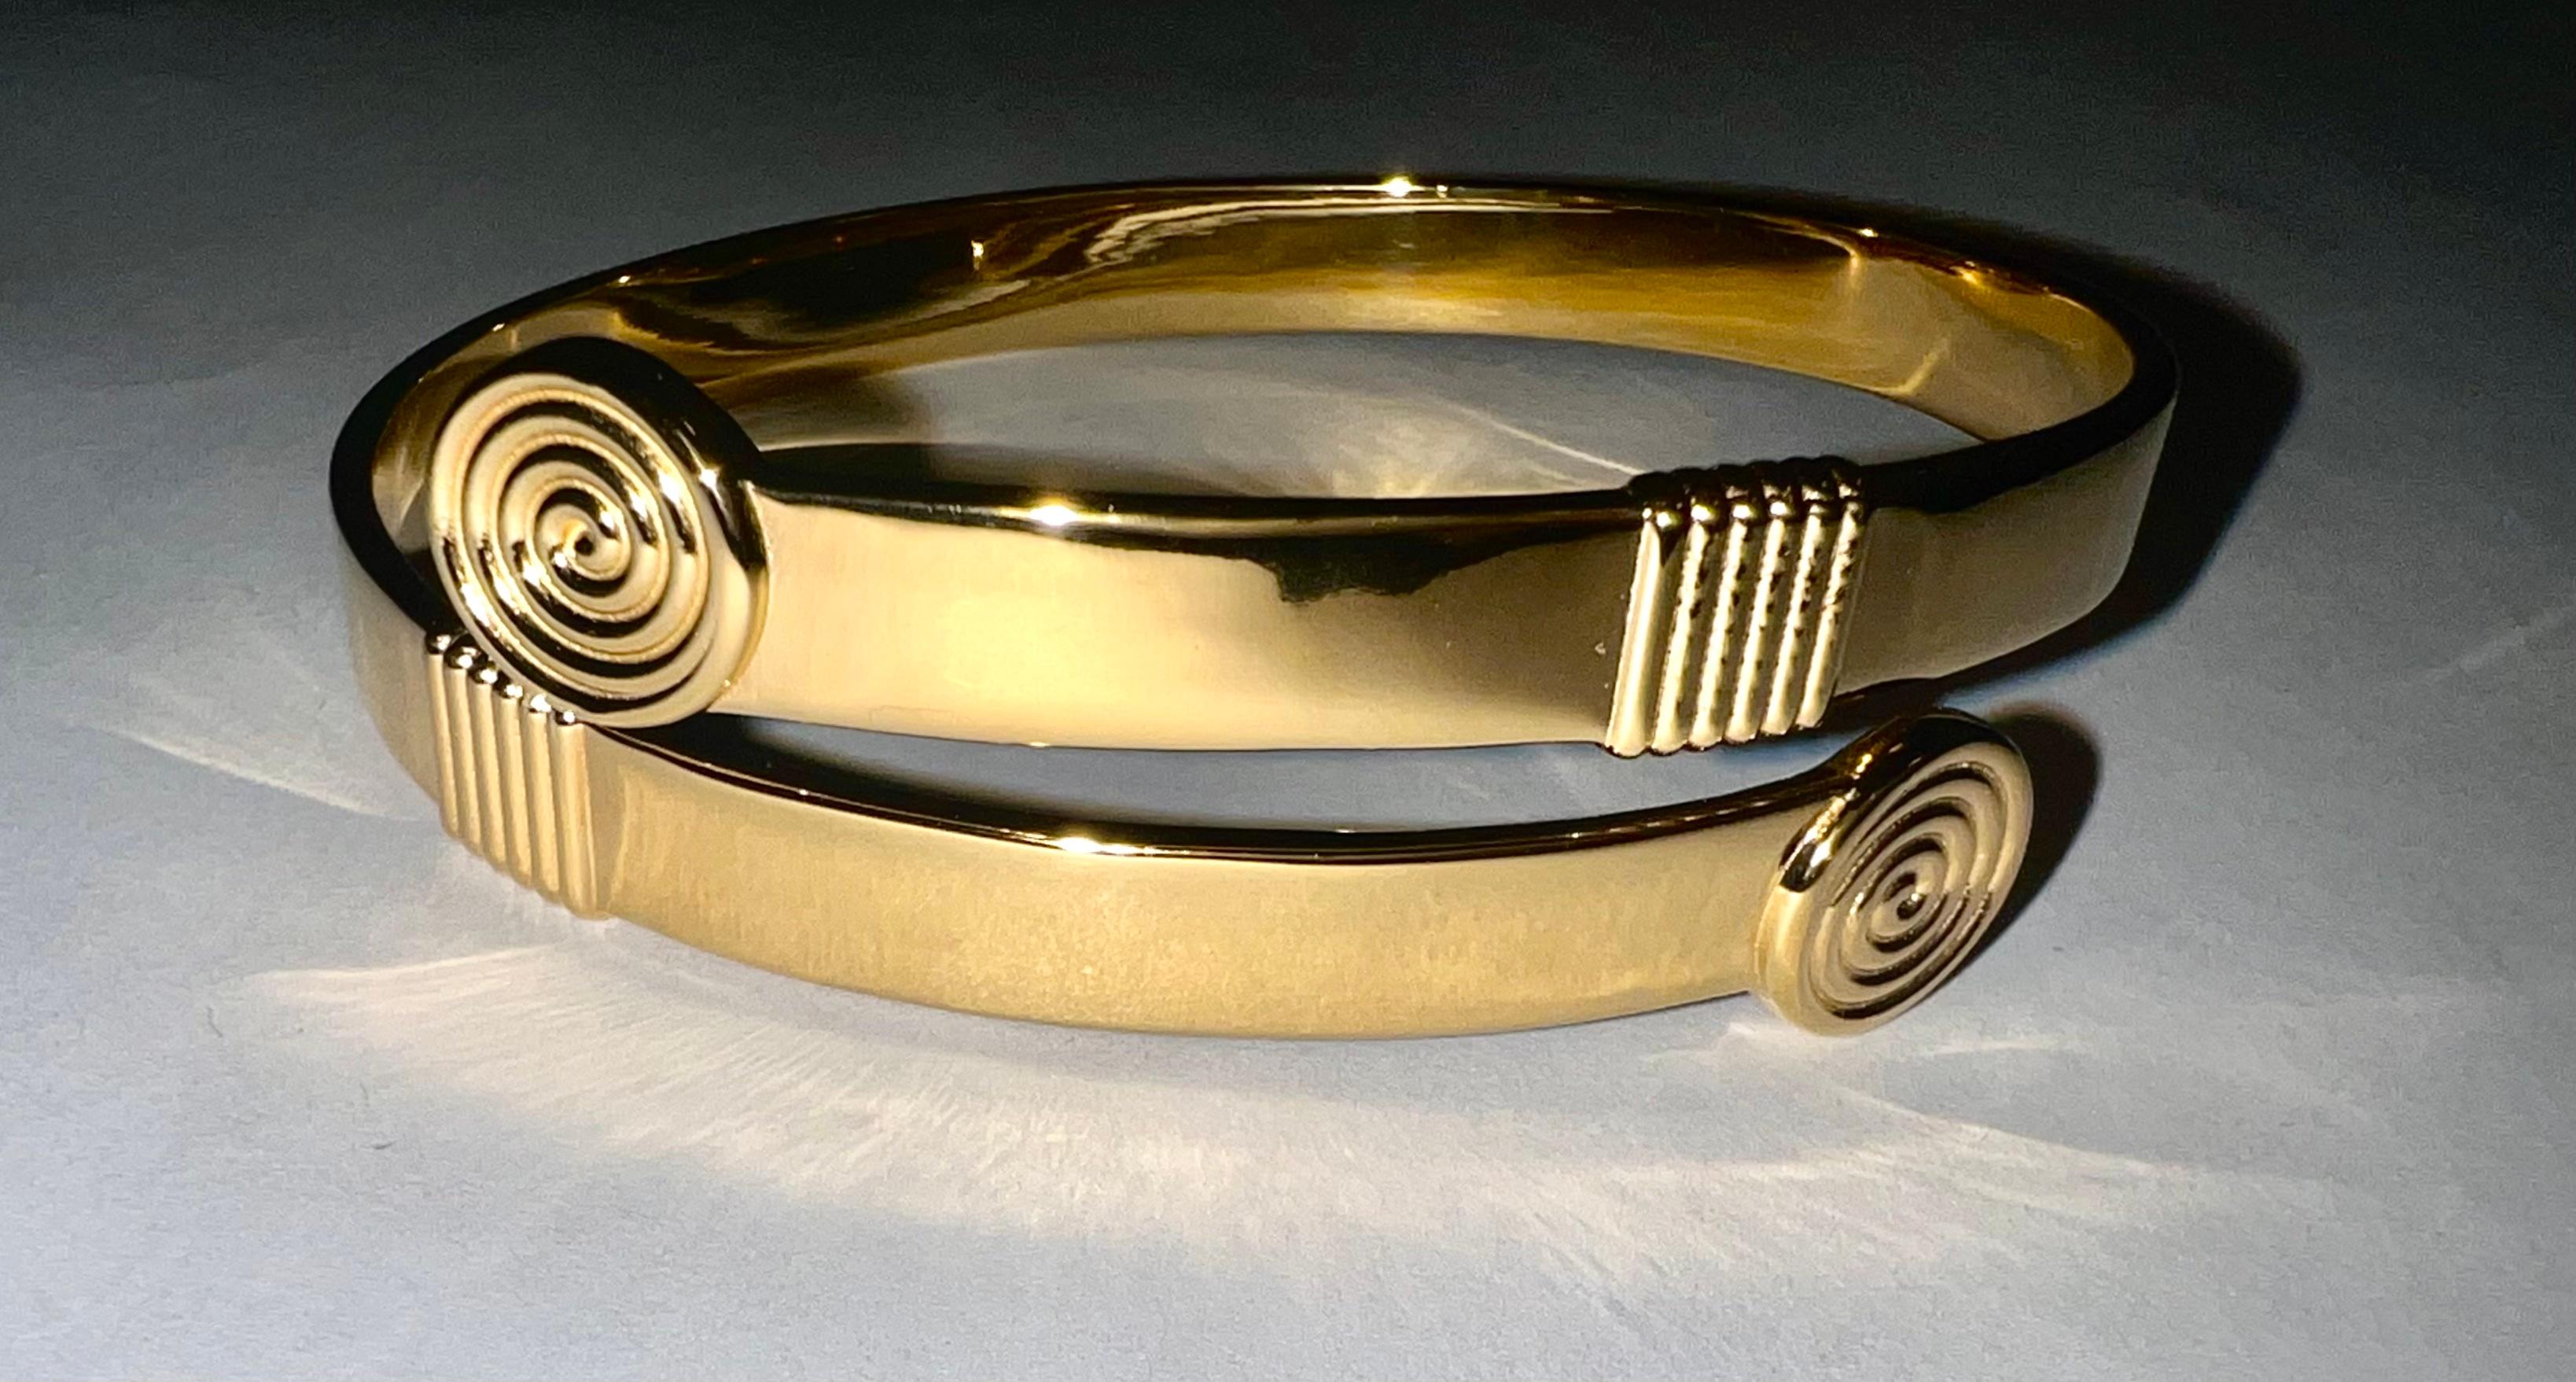 22 Karat Yellow Gold Geometric Bracelet by ROMAE Jewelry - Inspired by an Ancient Roman Design. Our 